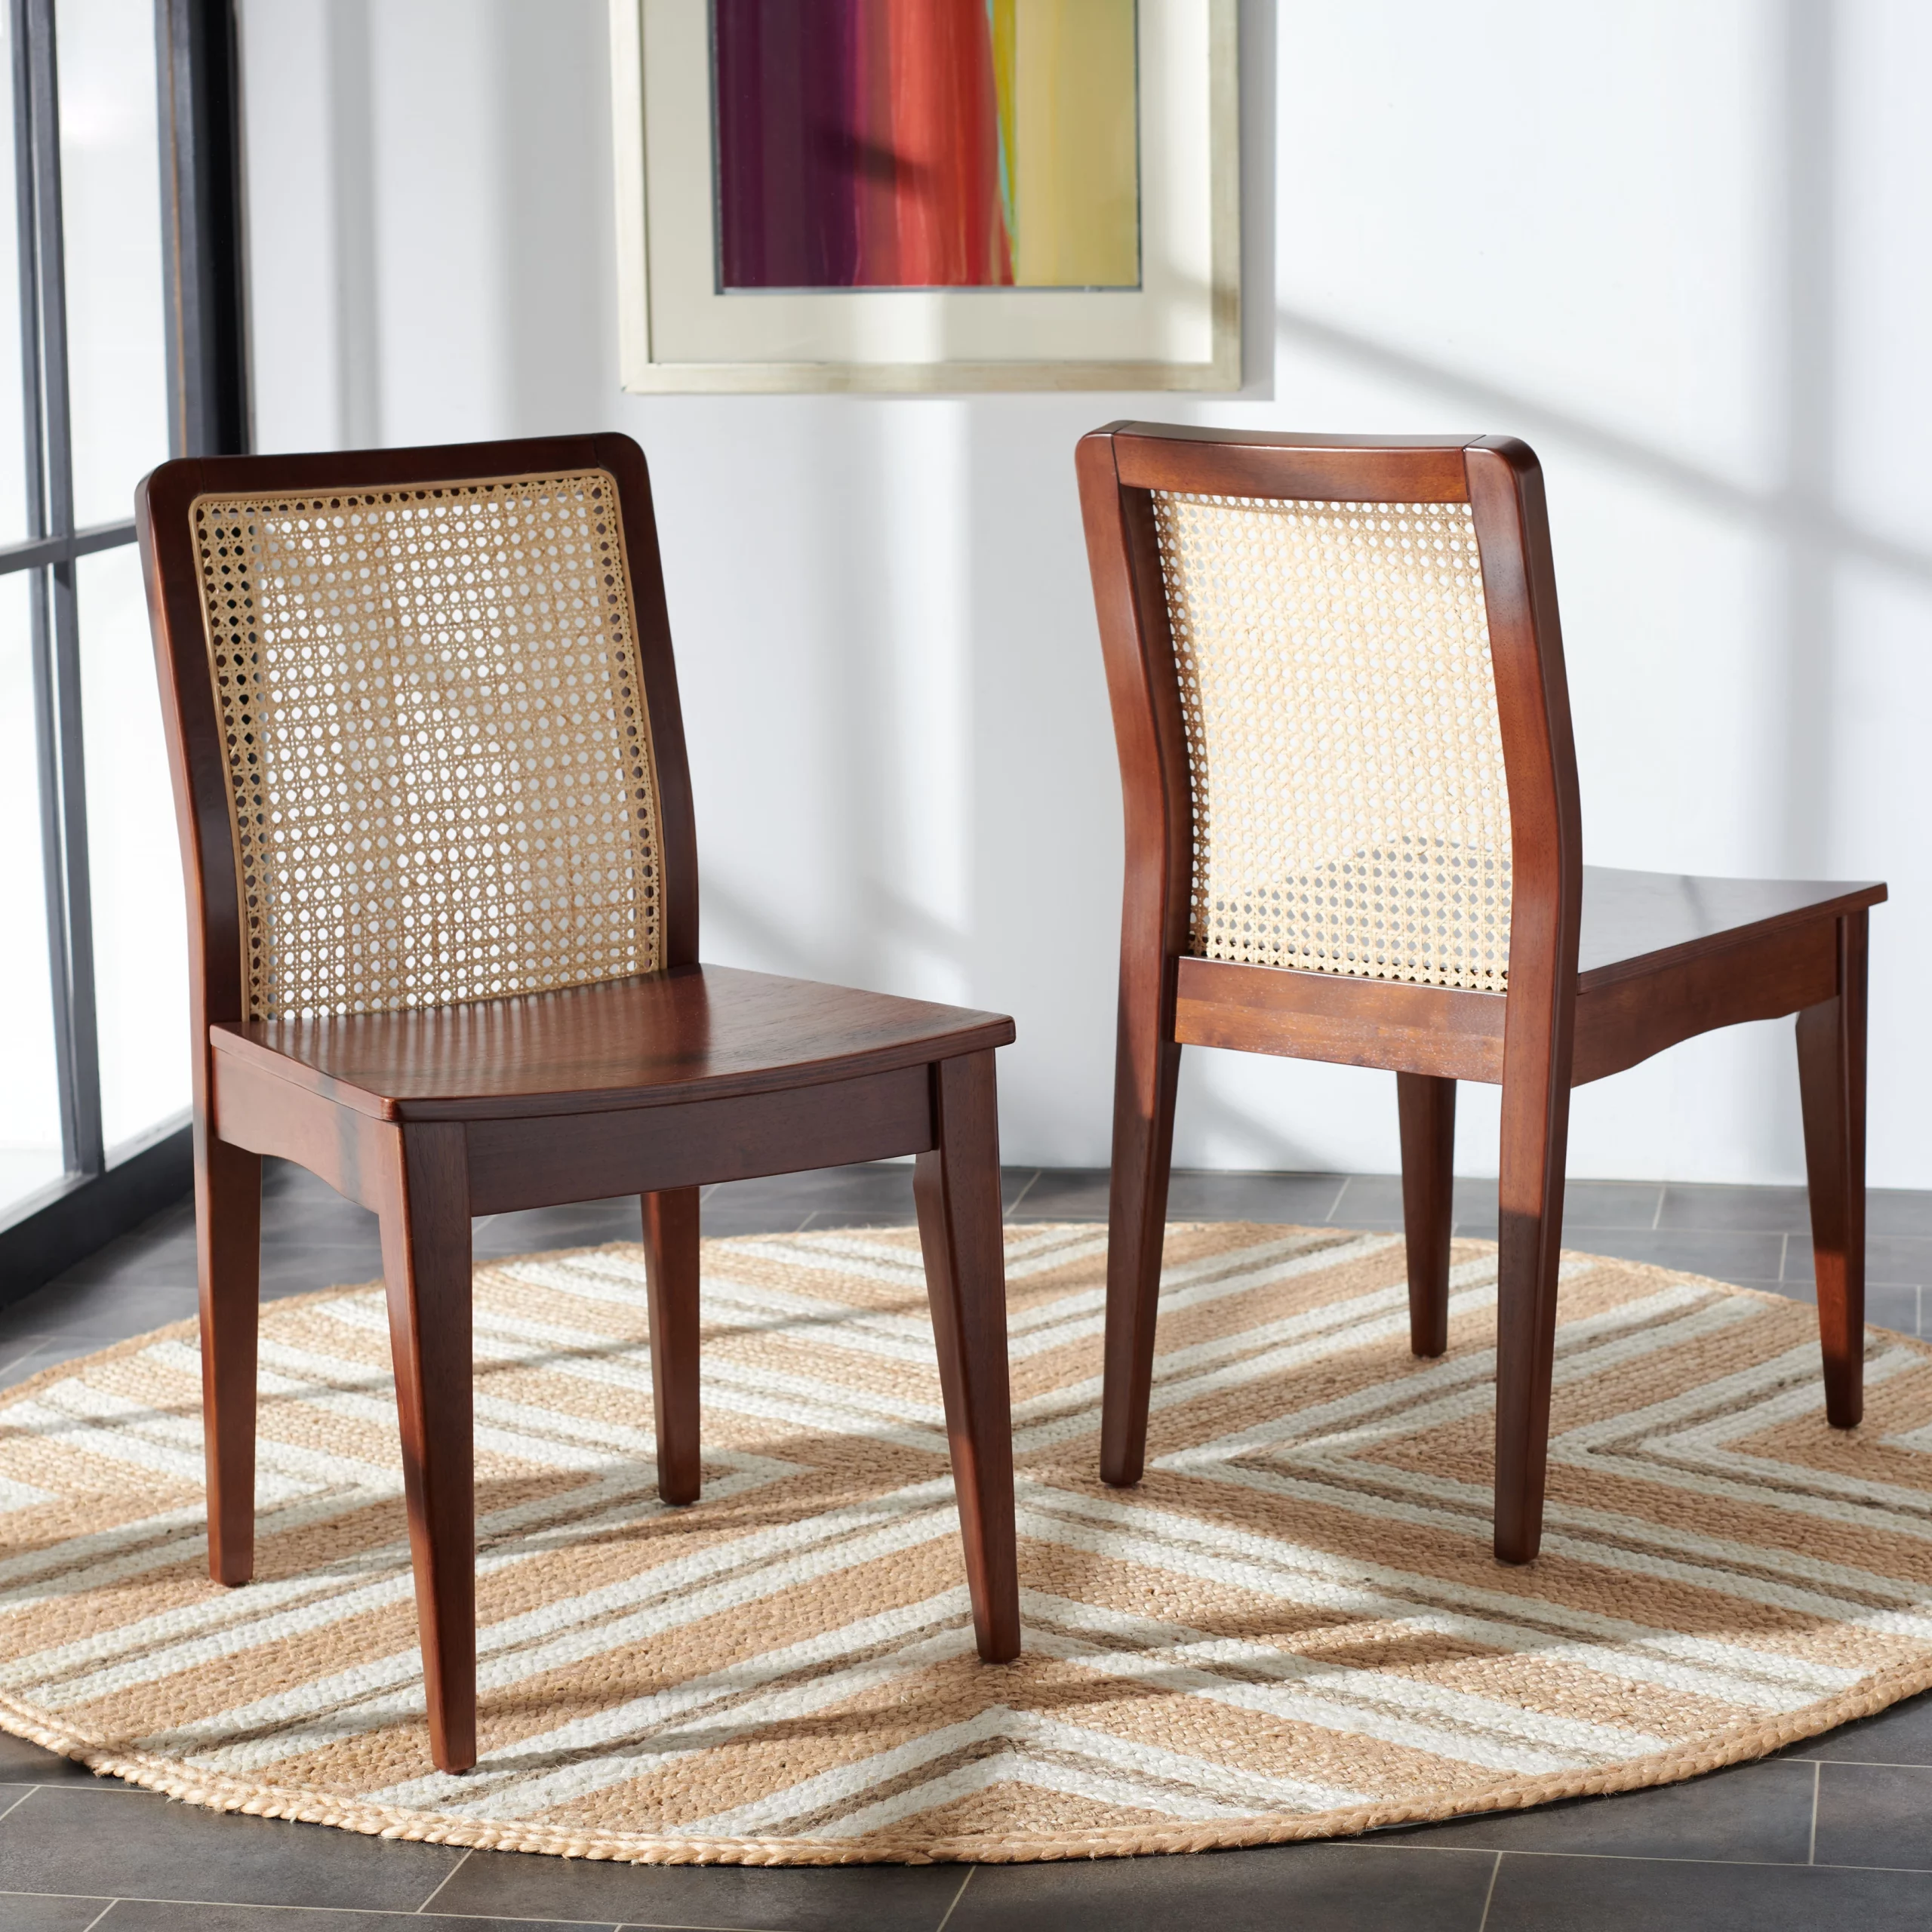 Bring in Texture with a Rattan Backed Chair